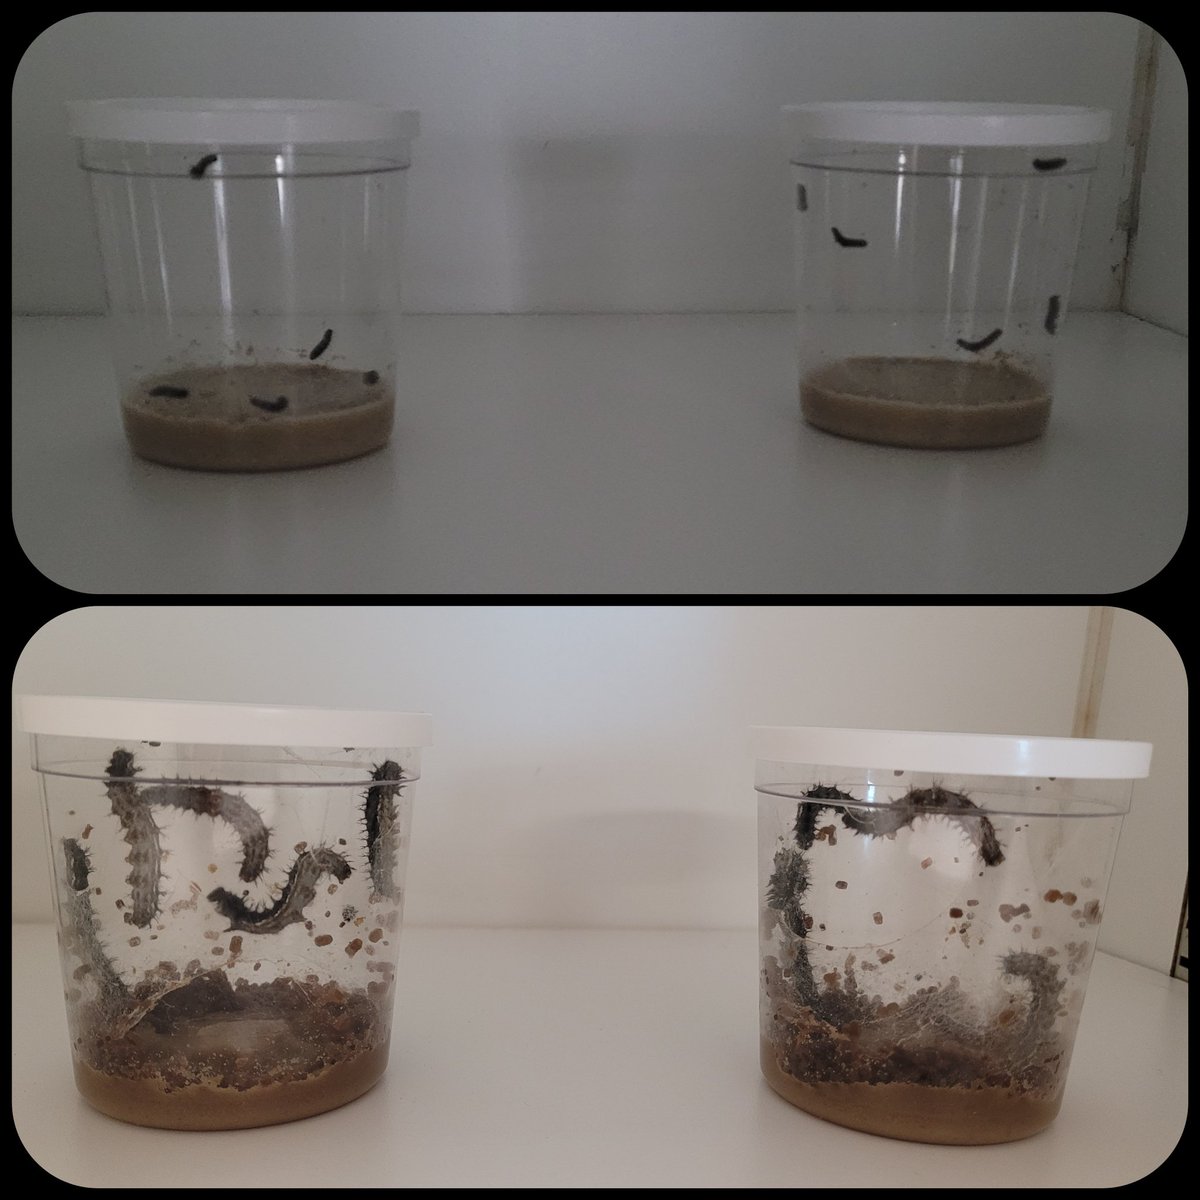 Continuing to study the life cycle with our caterpillars. Students have been amazed to see the difference one week has made. Can't wait to see our Pupa stage!🐛➡️🦋 #LifeCycle  #HandsOnLearning #LionsSpeakLife #TeamSISD